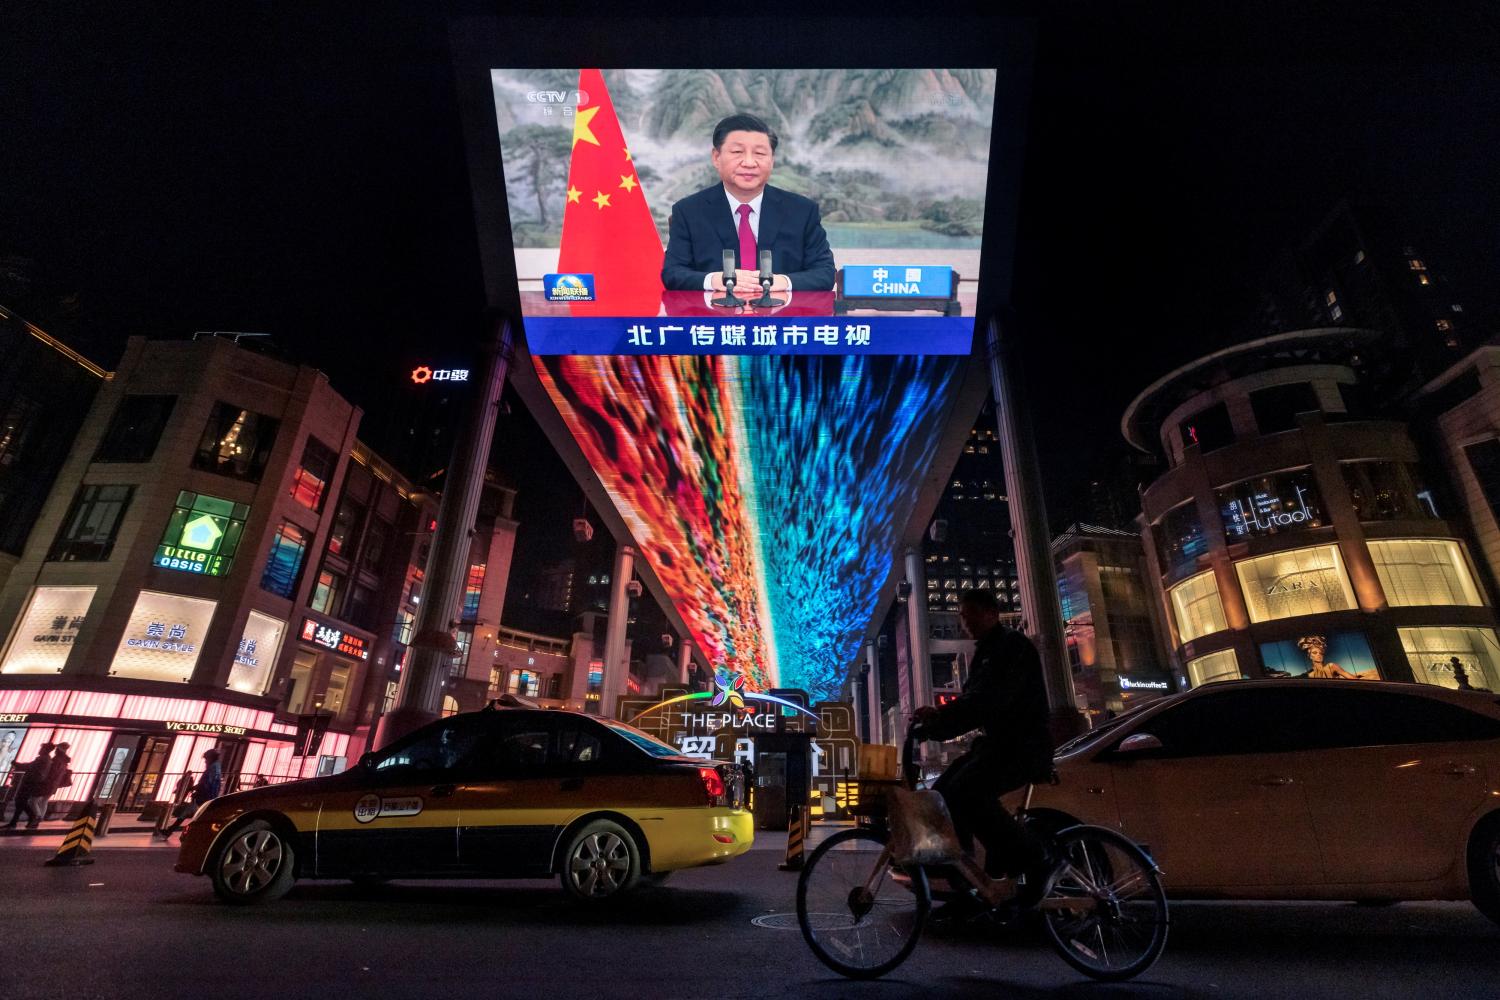 FILE PHOTO: A screen displays a CCTV state media news broadcast showing Chinese President Xi Jinping addressing world leaders at the G20 meeting in Rome via video link at a shopping mall in Beijing, China, October 31, 2021.  REUTERS/Thomas Peter/File Photo